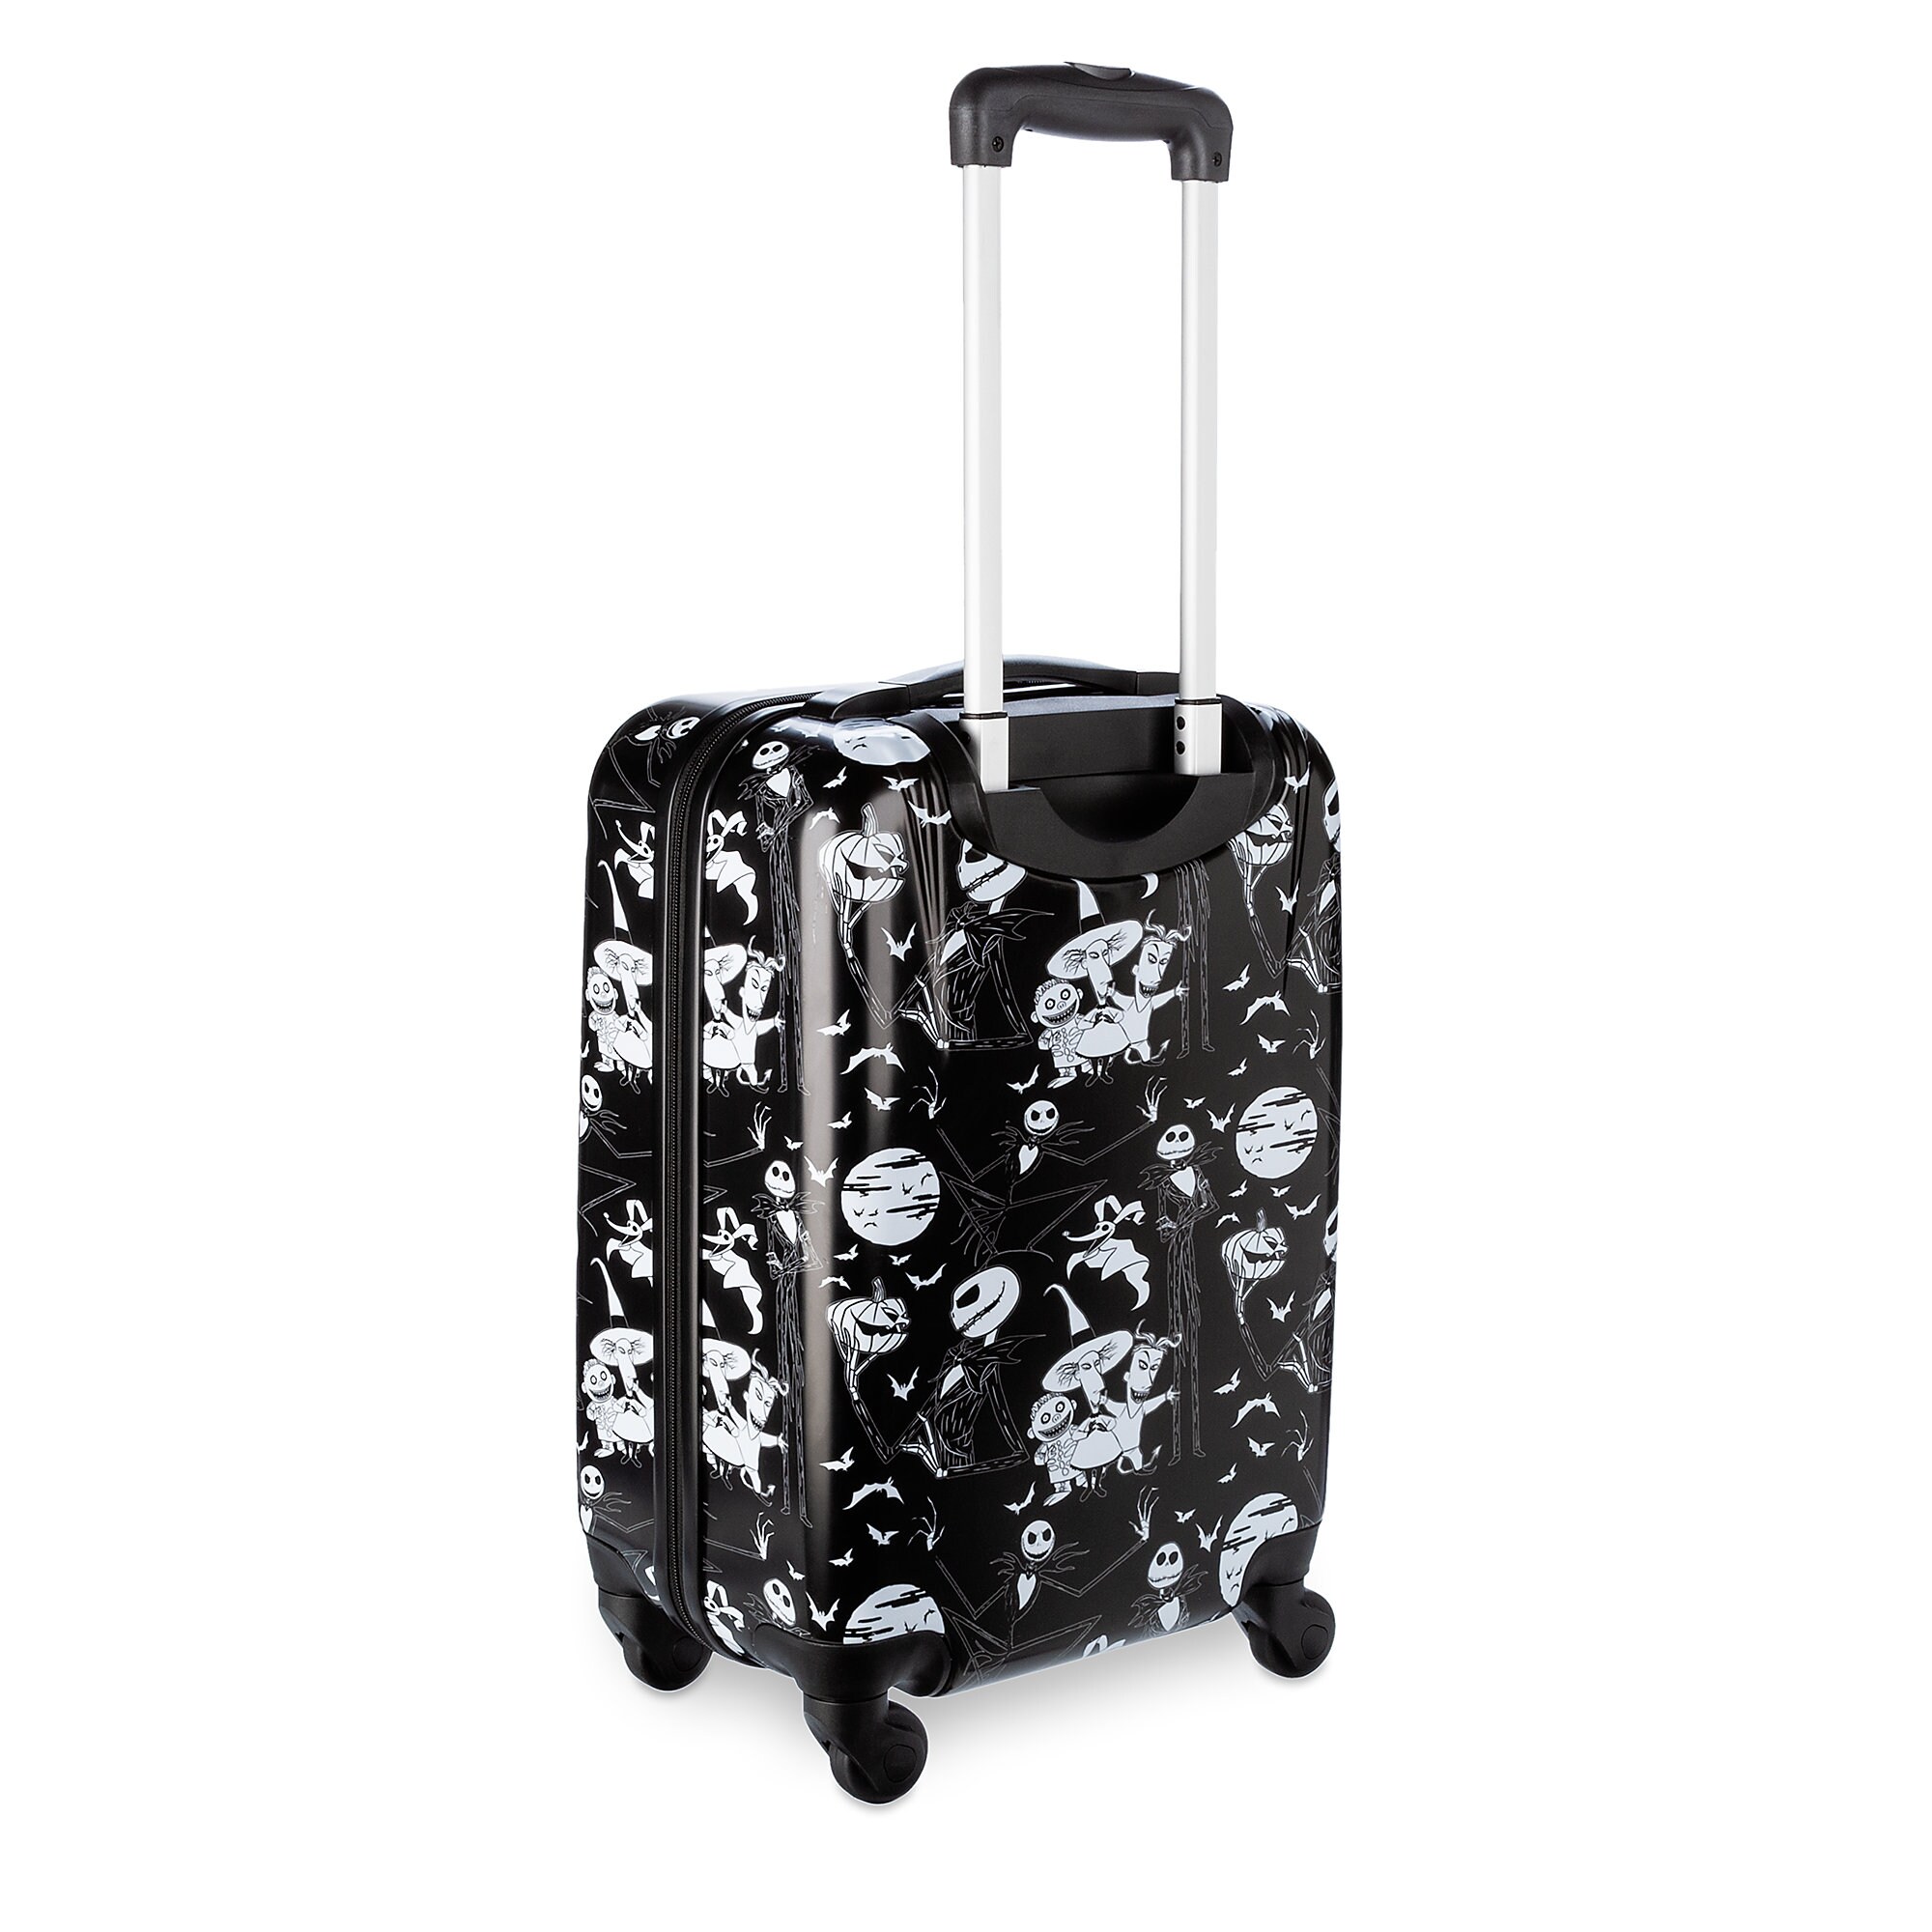 The Nightmare Before Christmas Rolling Luggage - Small